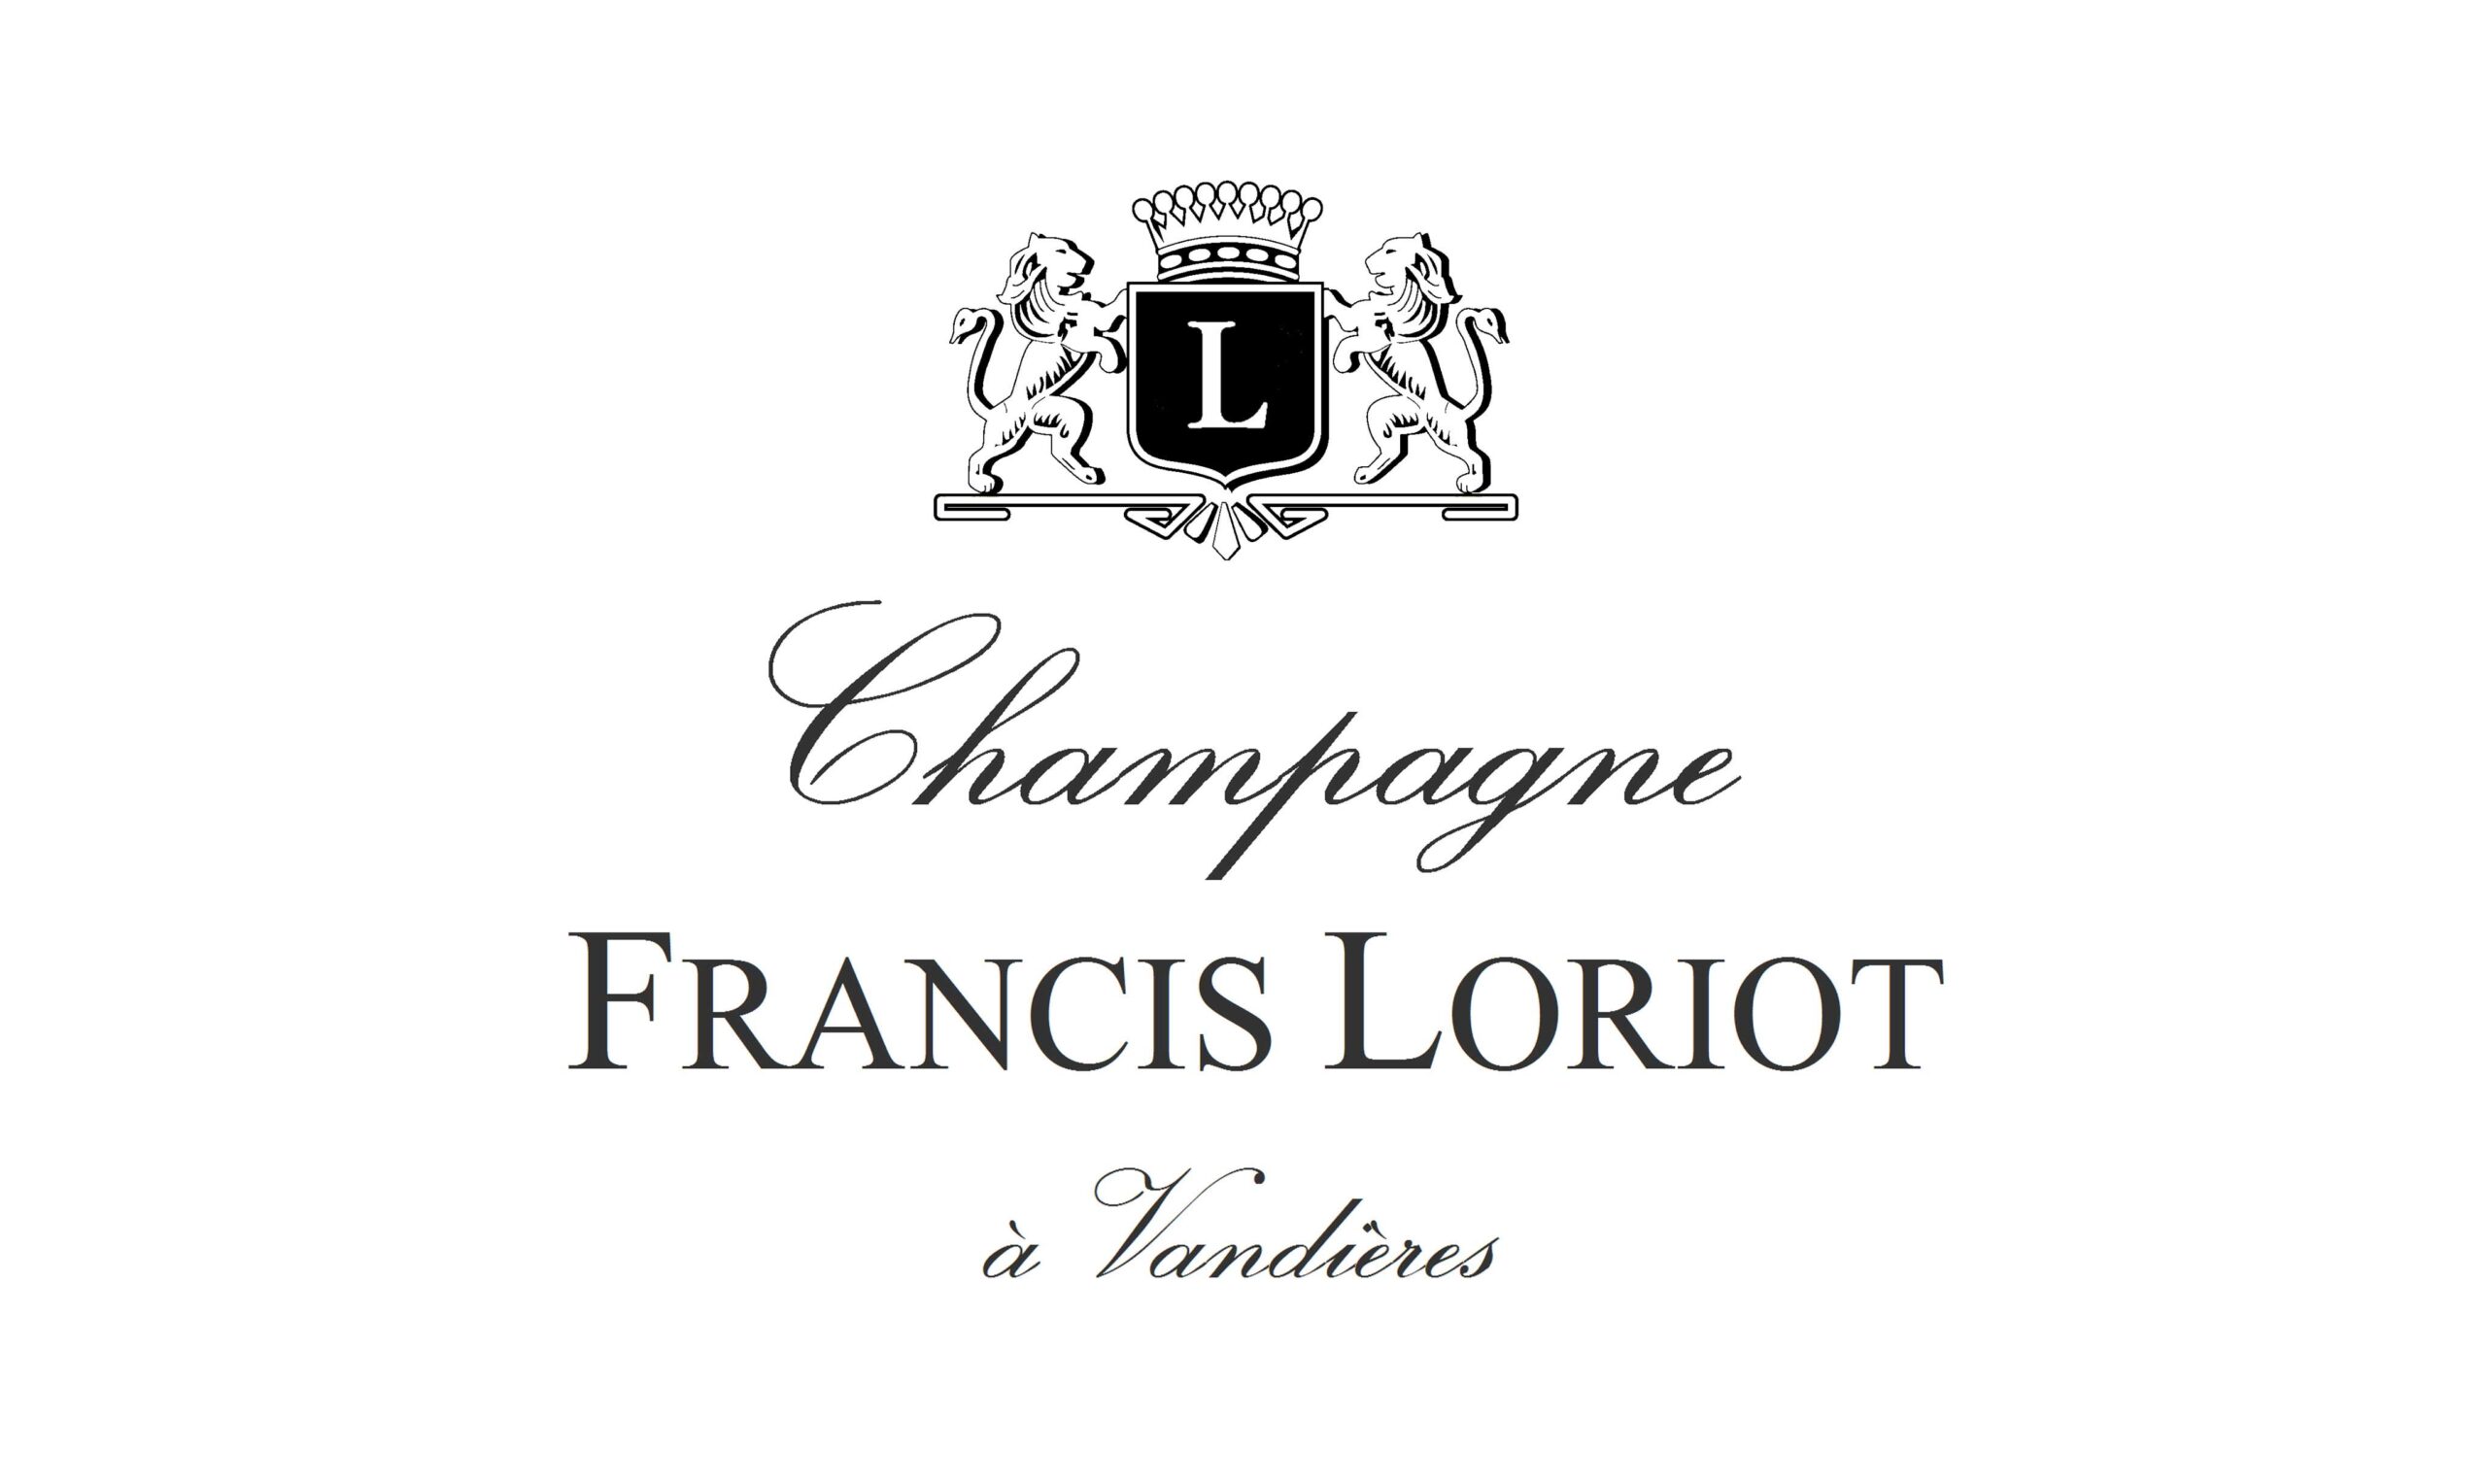 Champagne Francis Loriot